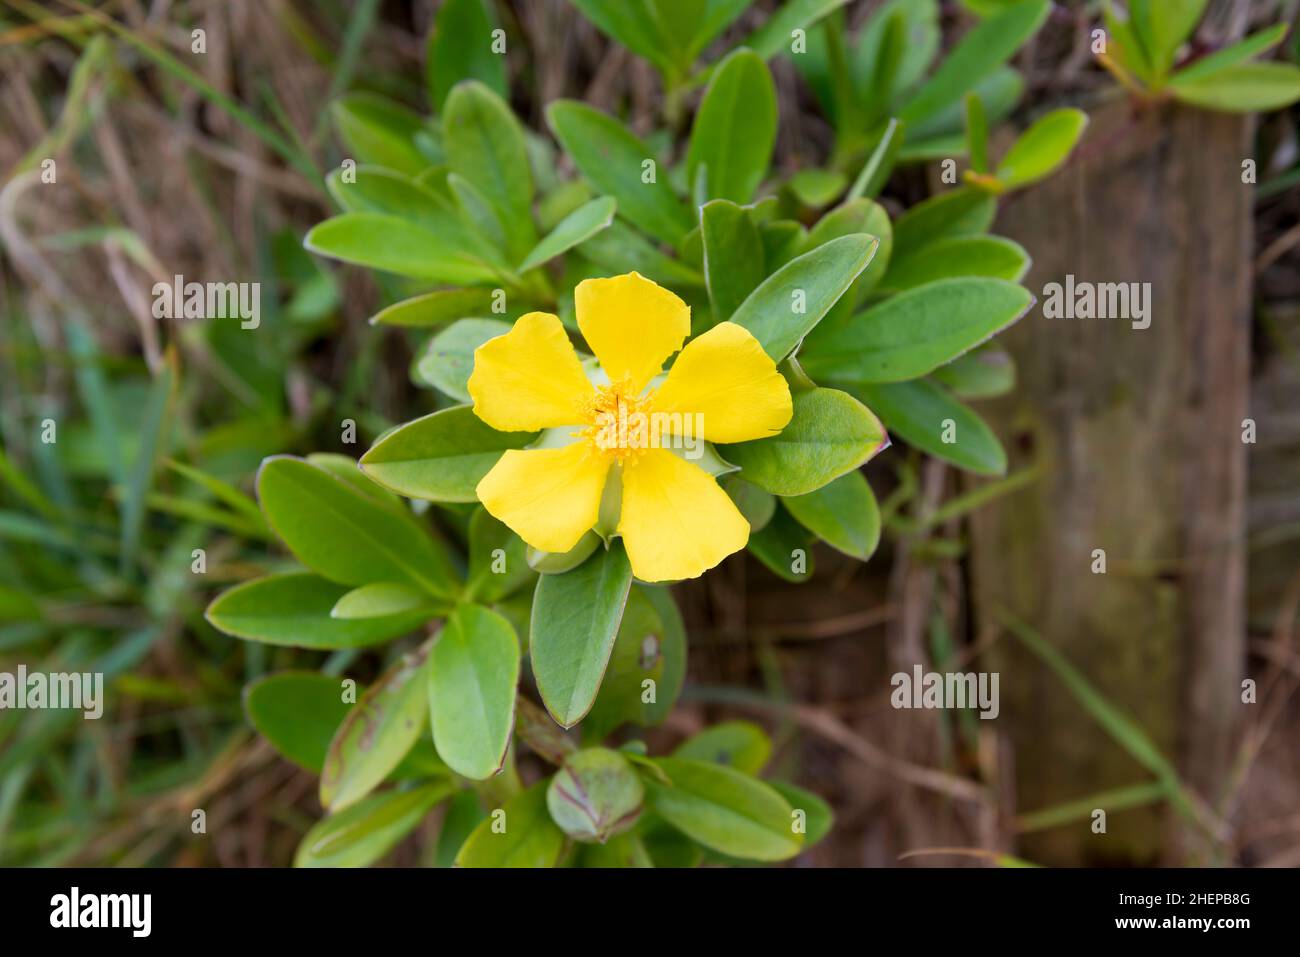 Twining guinea flower (Hibbertia scandens) is a yellow flowering native Australian vine that scrambles over the sand dunes and can climb into trees. Stock Photo